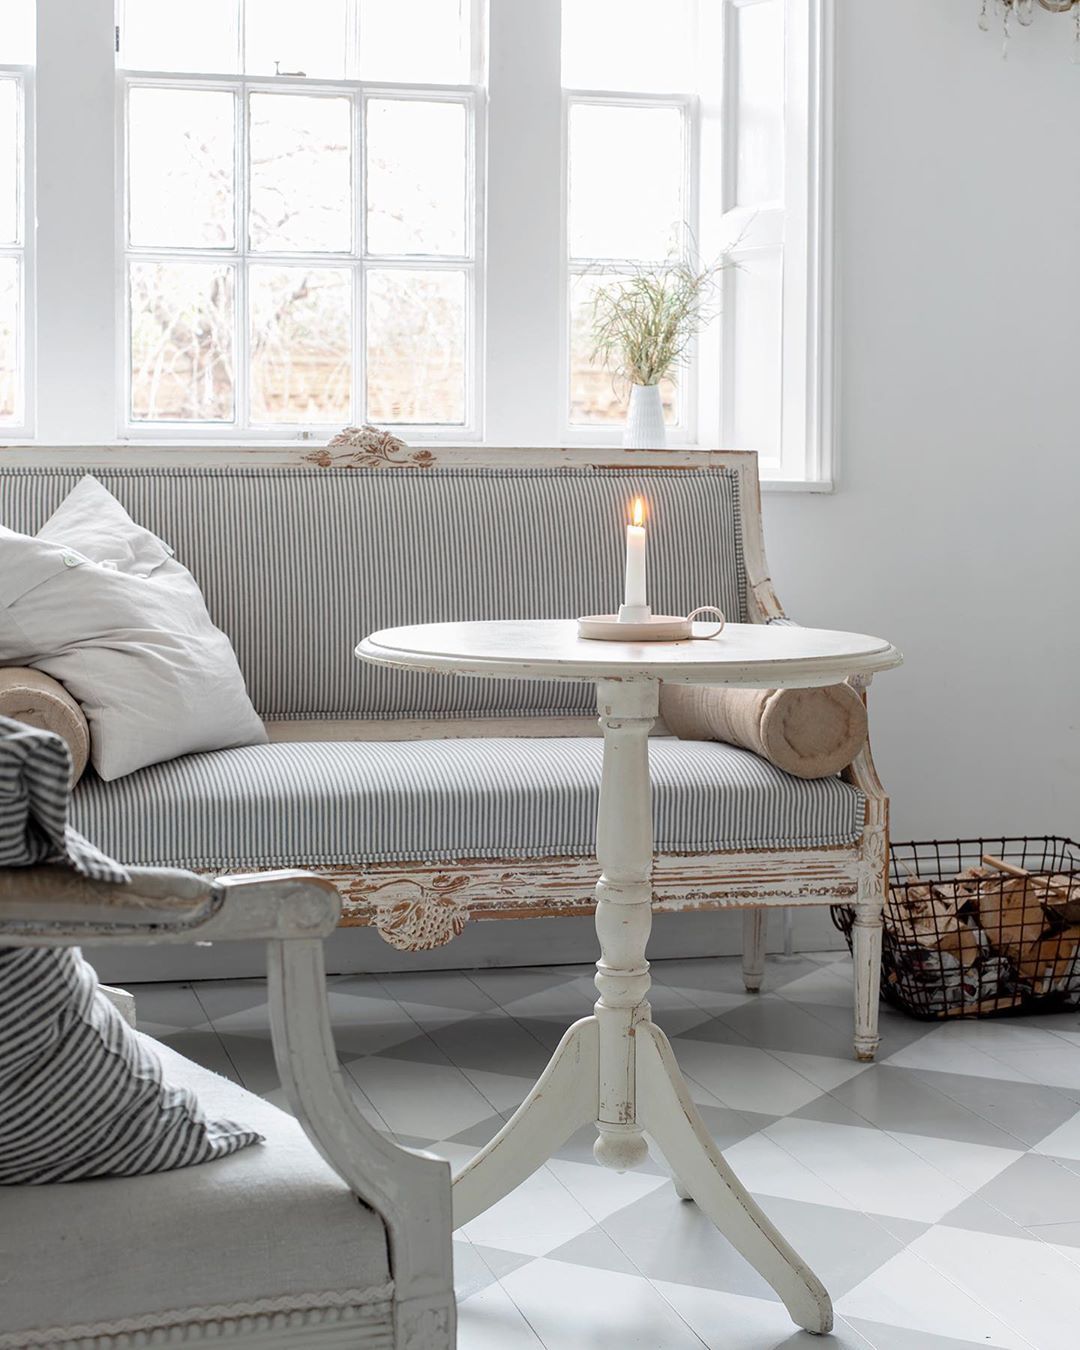 Settee in French Country Breakfast Nook via @white_and_faded